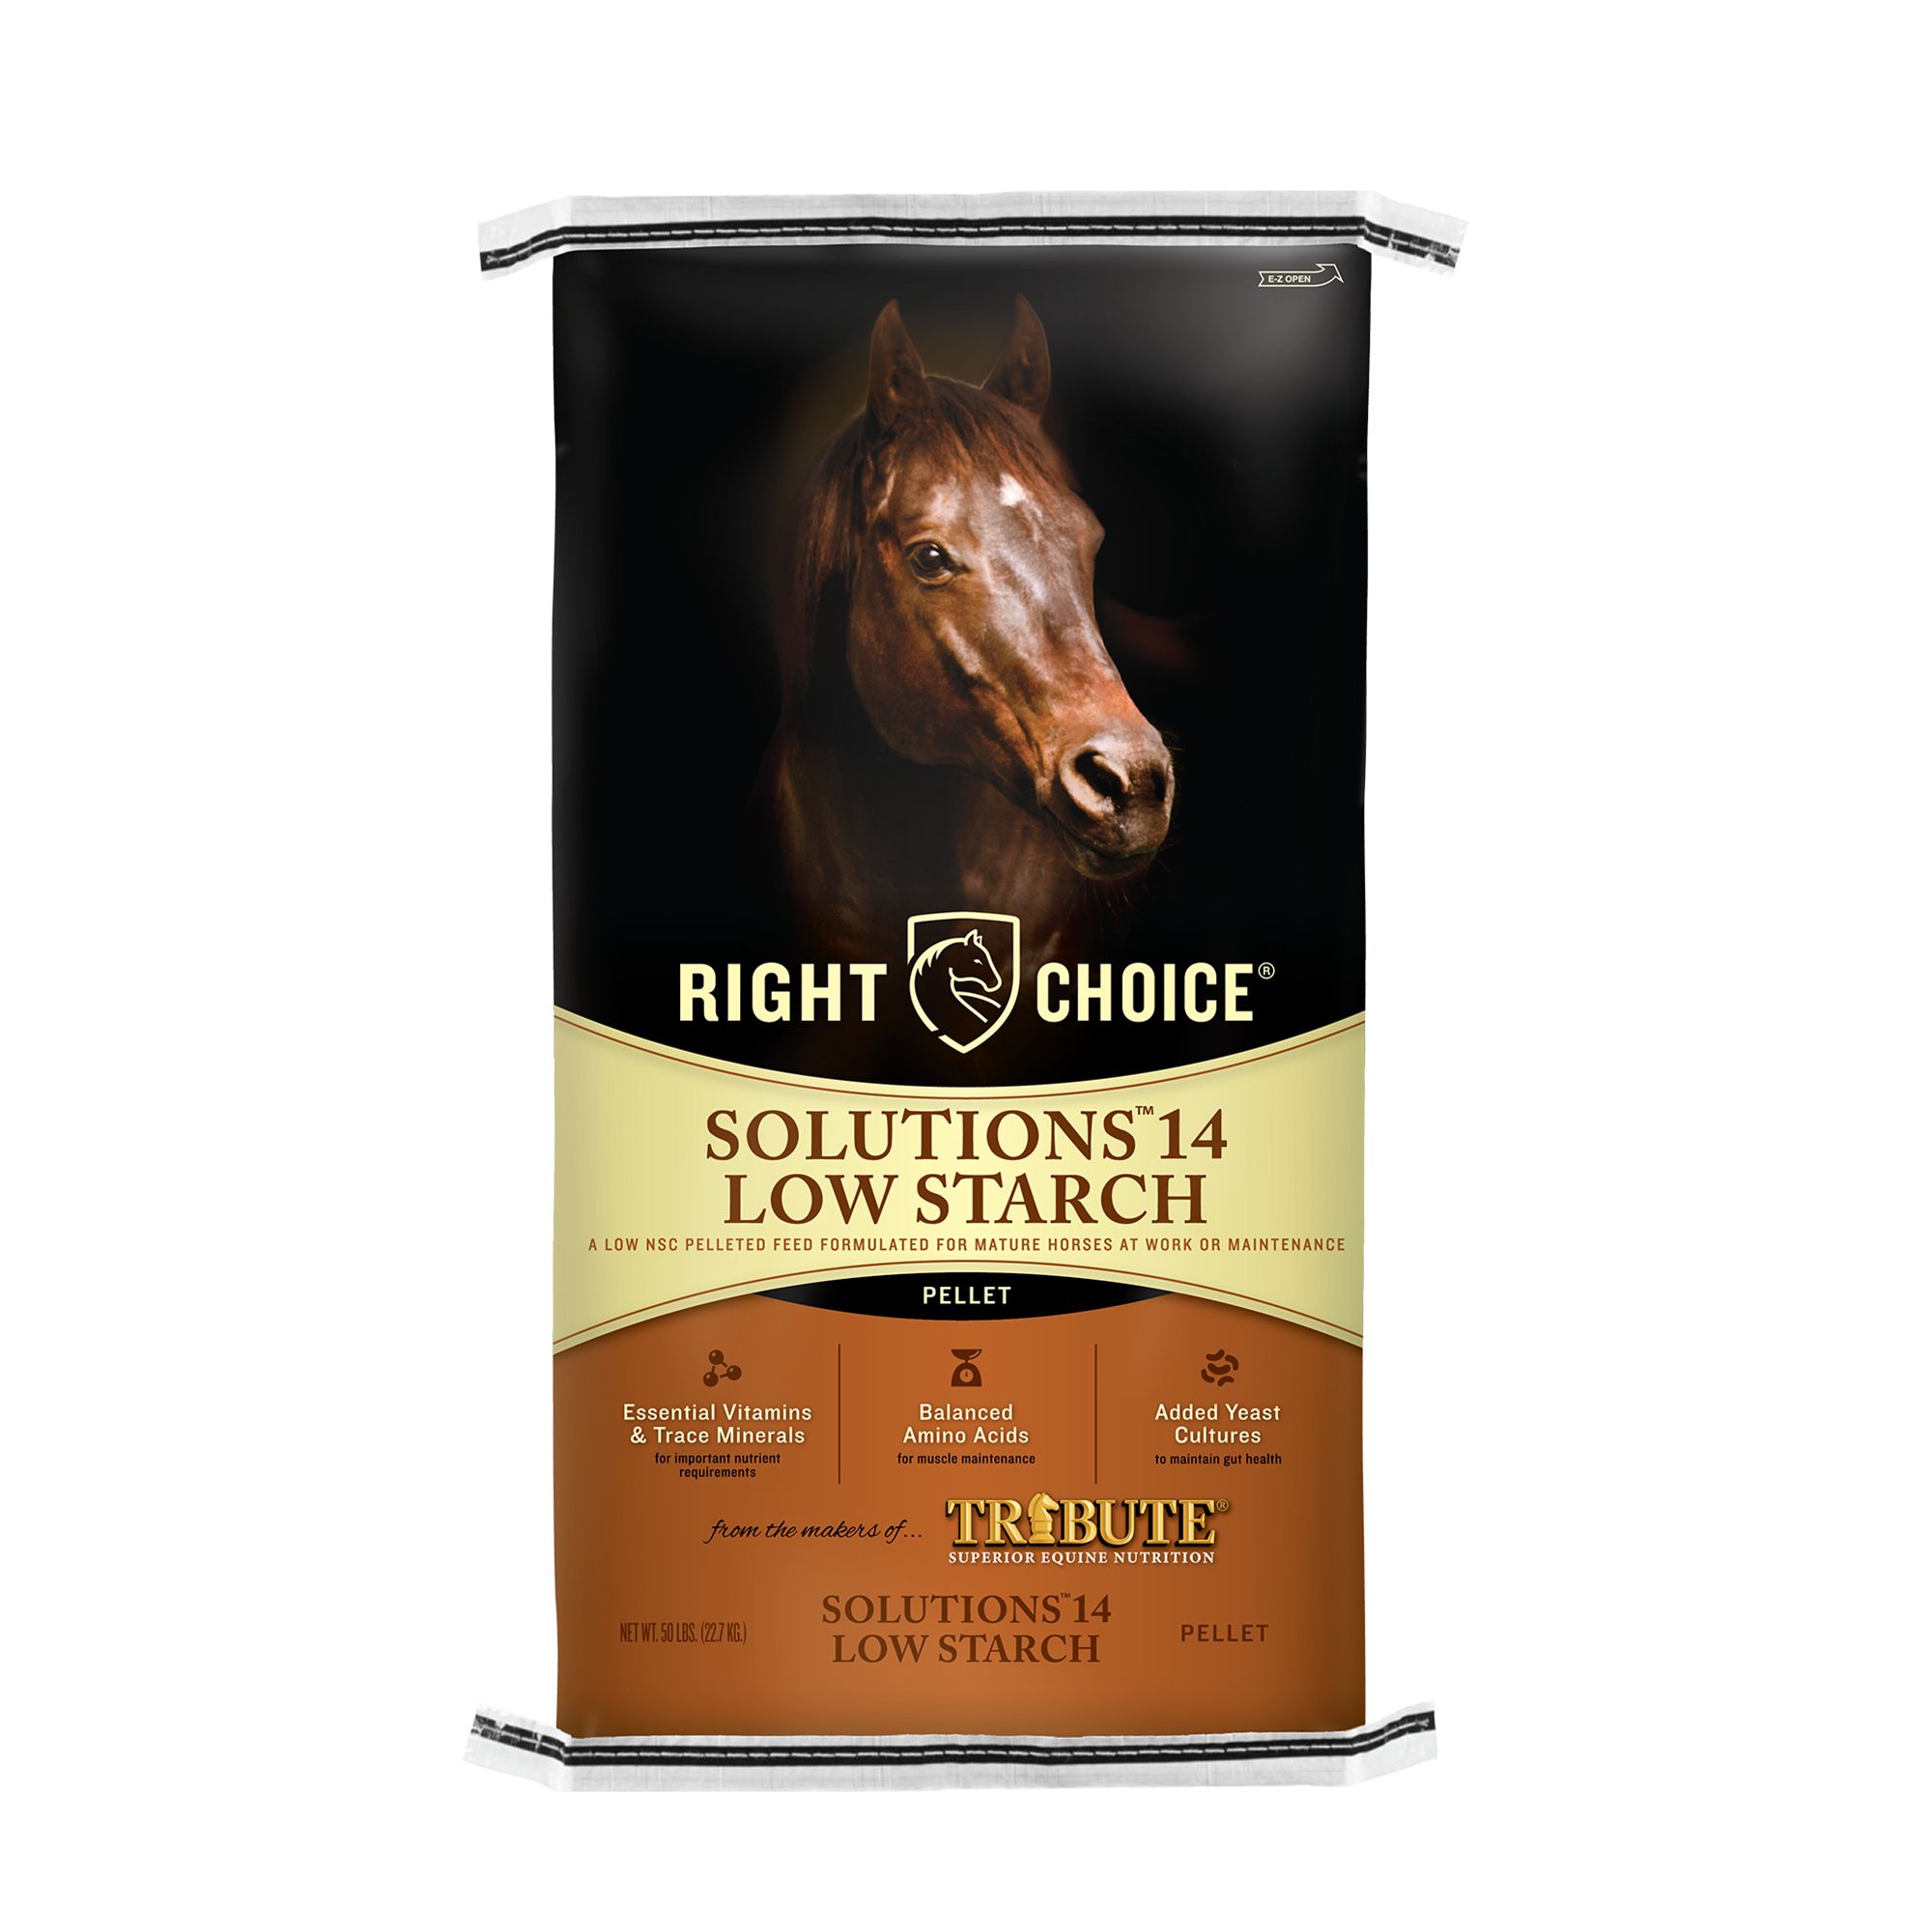 Right Choice® Solutions 14 Low Starch Horse Feed